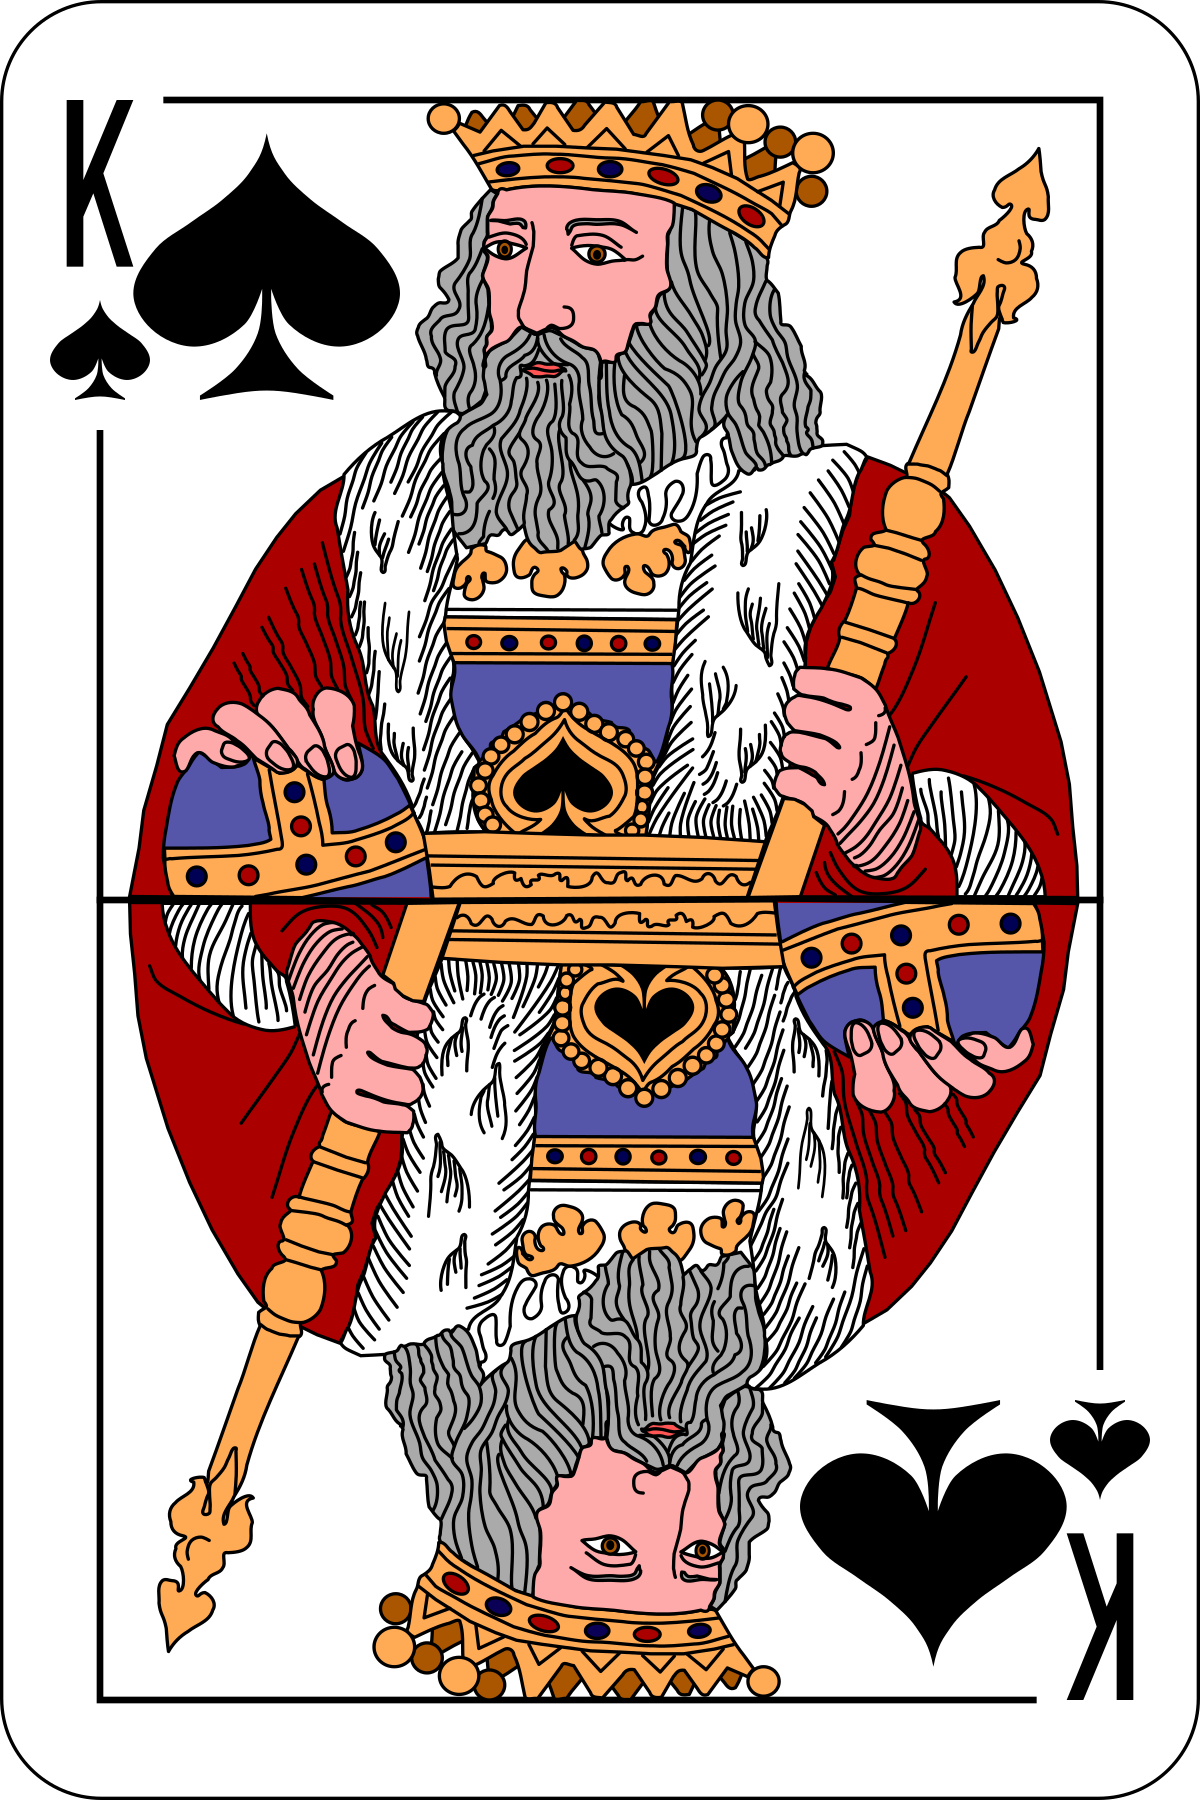 Download File:Atlas deck king of spades.svg - Wikimedia Commons